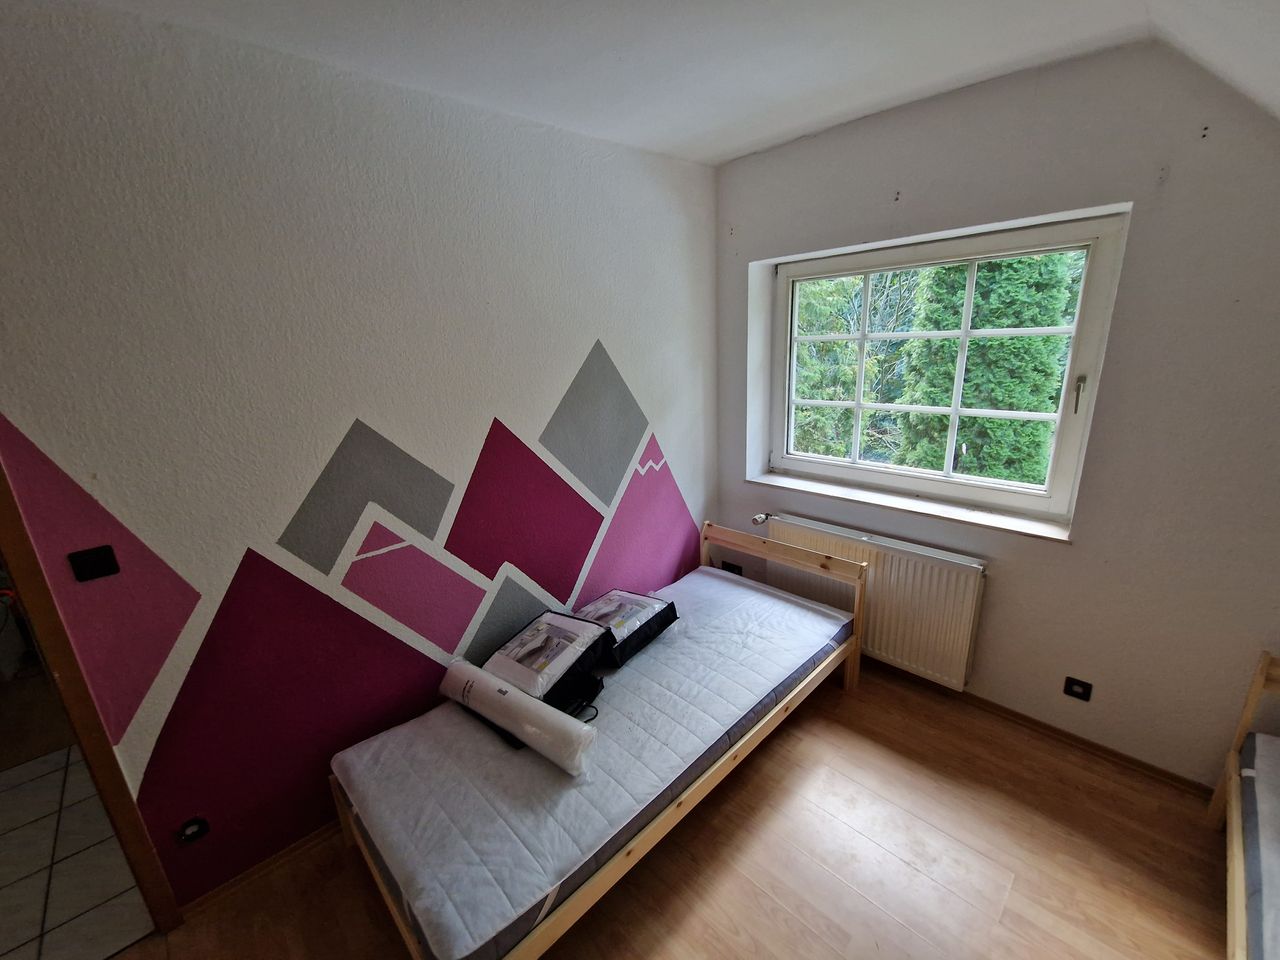 Quiet & awesome flat located in Kladow near Golf Course,3 bus-lines and the forest